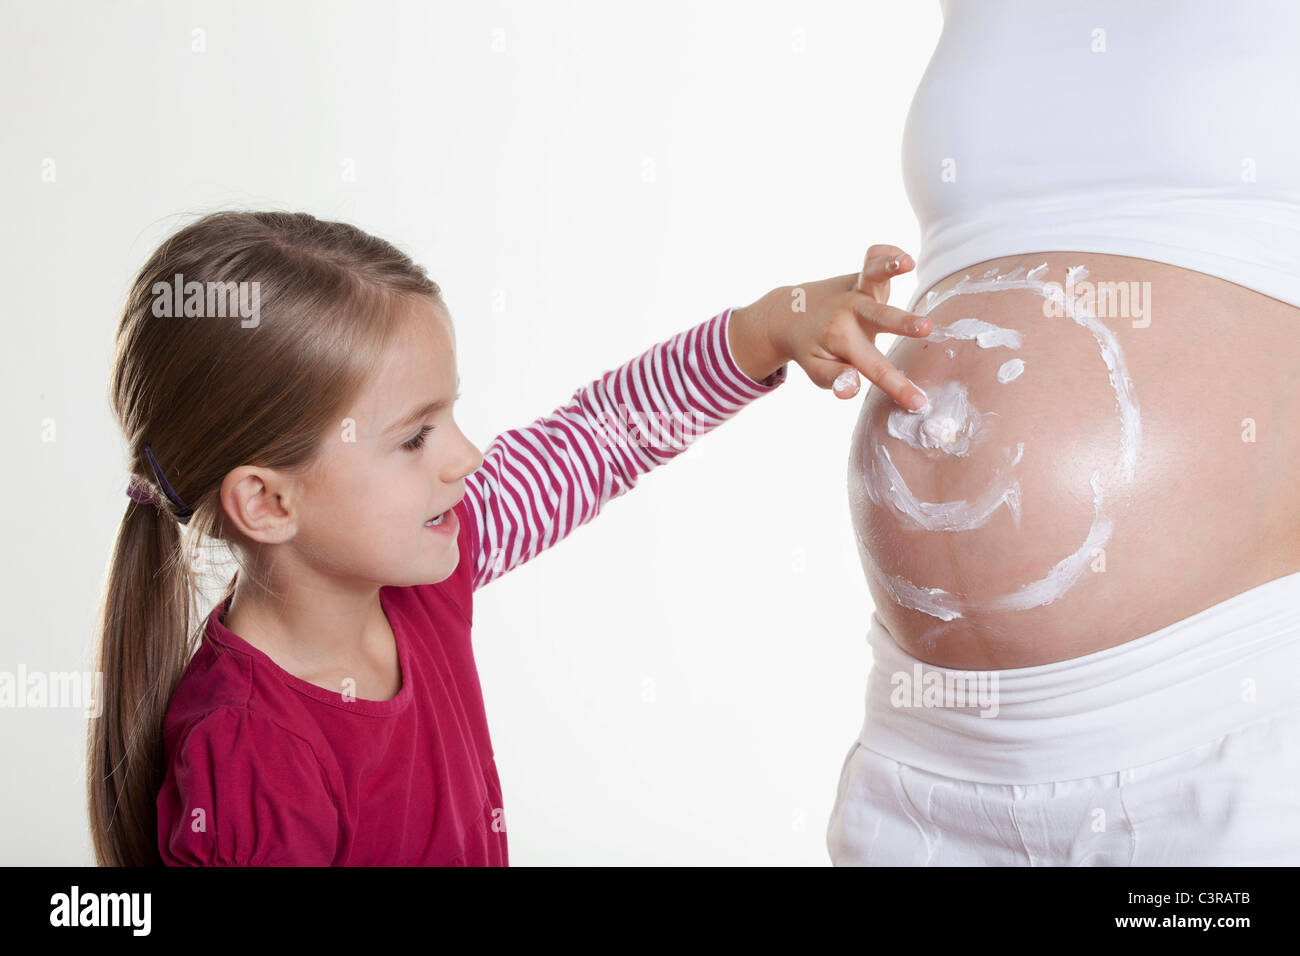 Daughter drawing smiley face on stomach of her pregnant mother Stock Photo